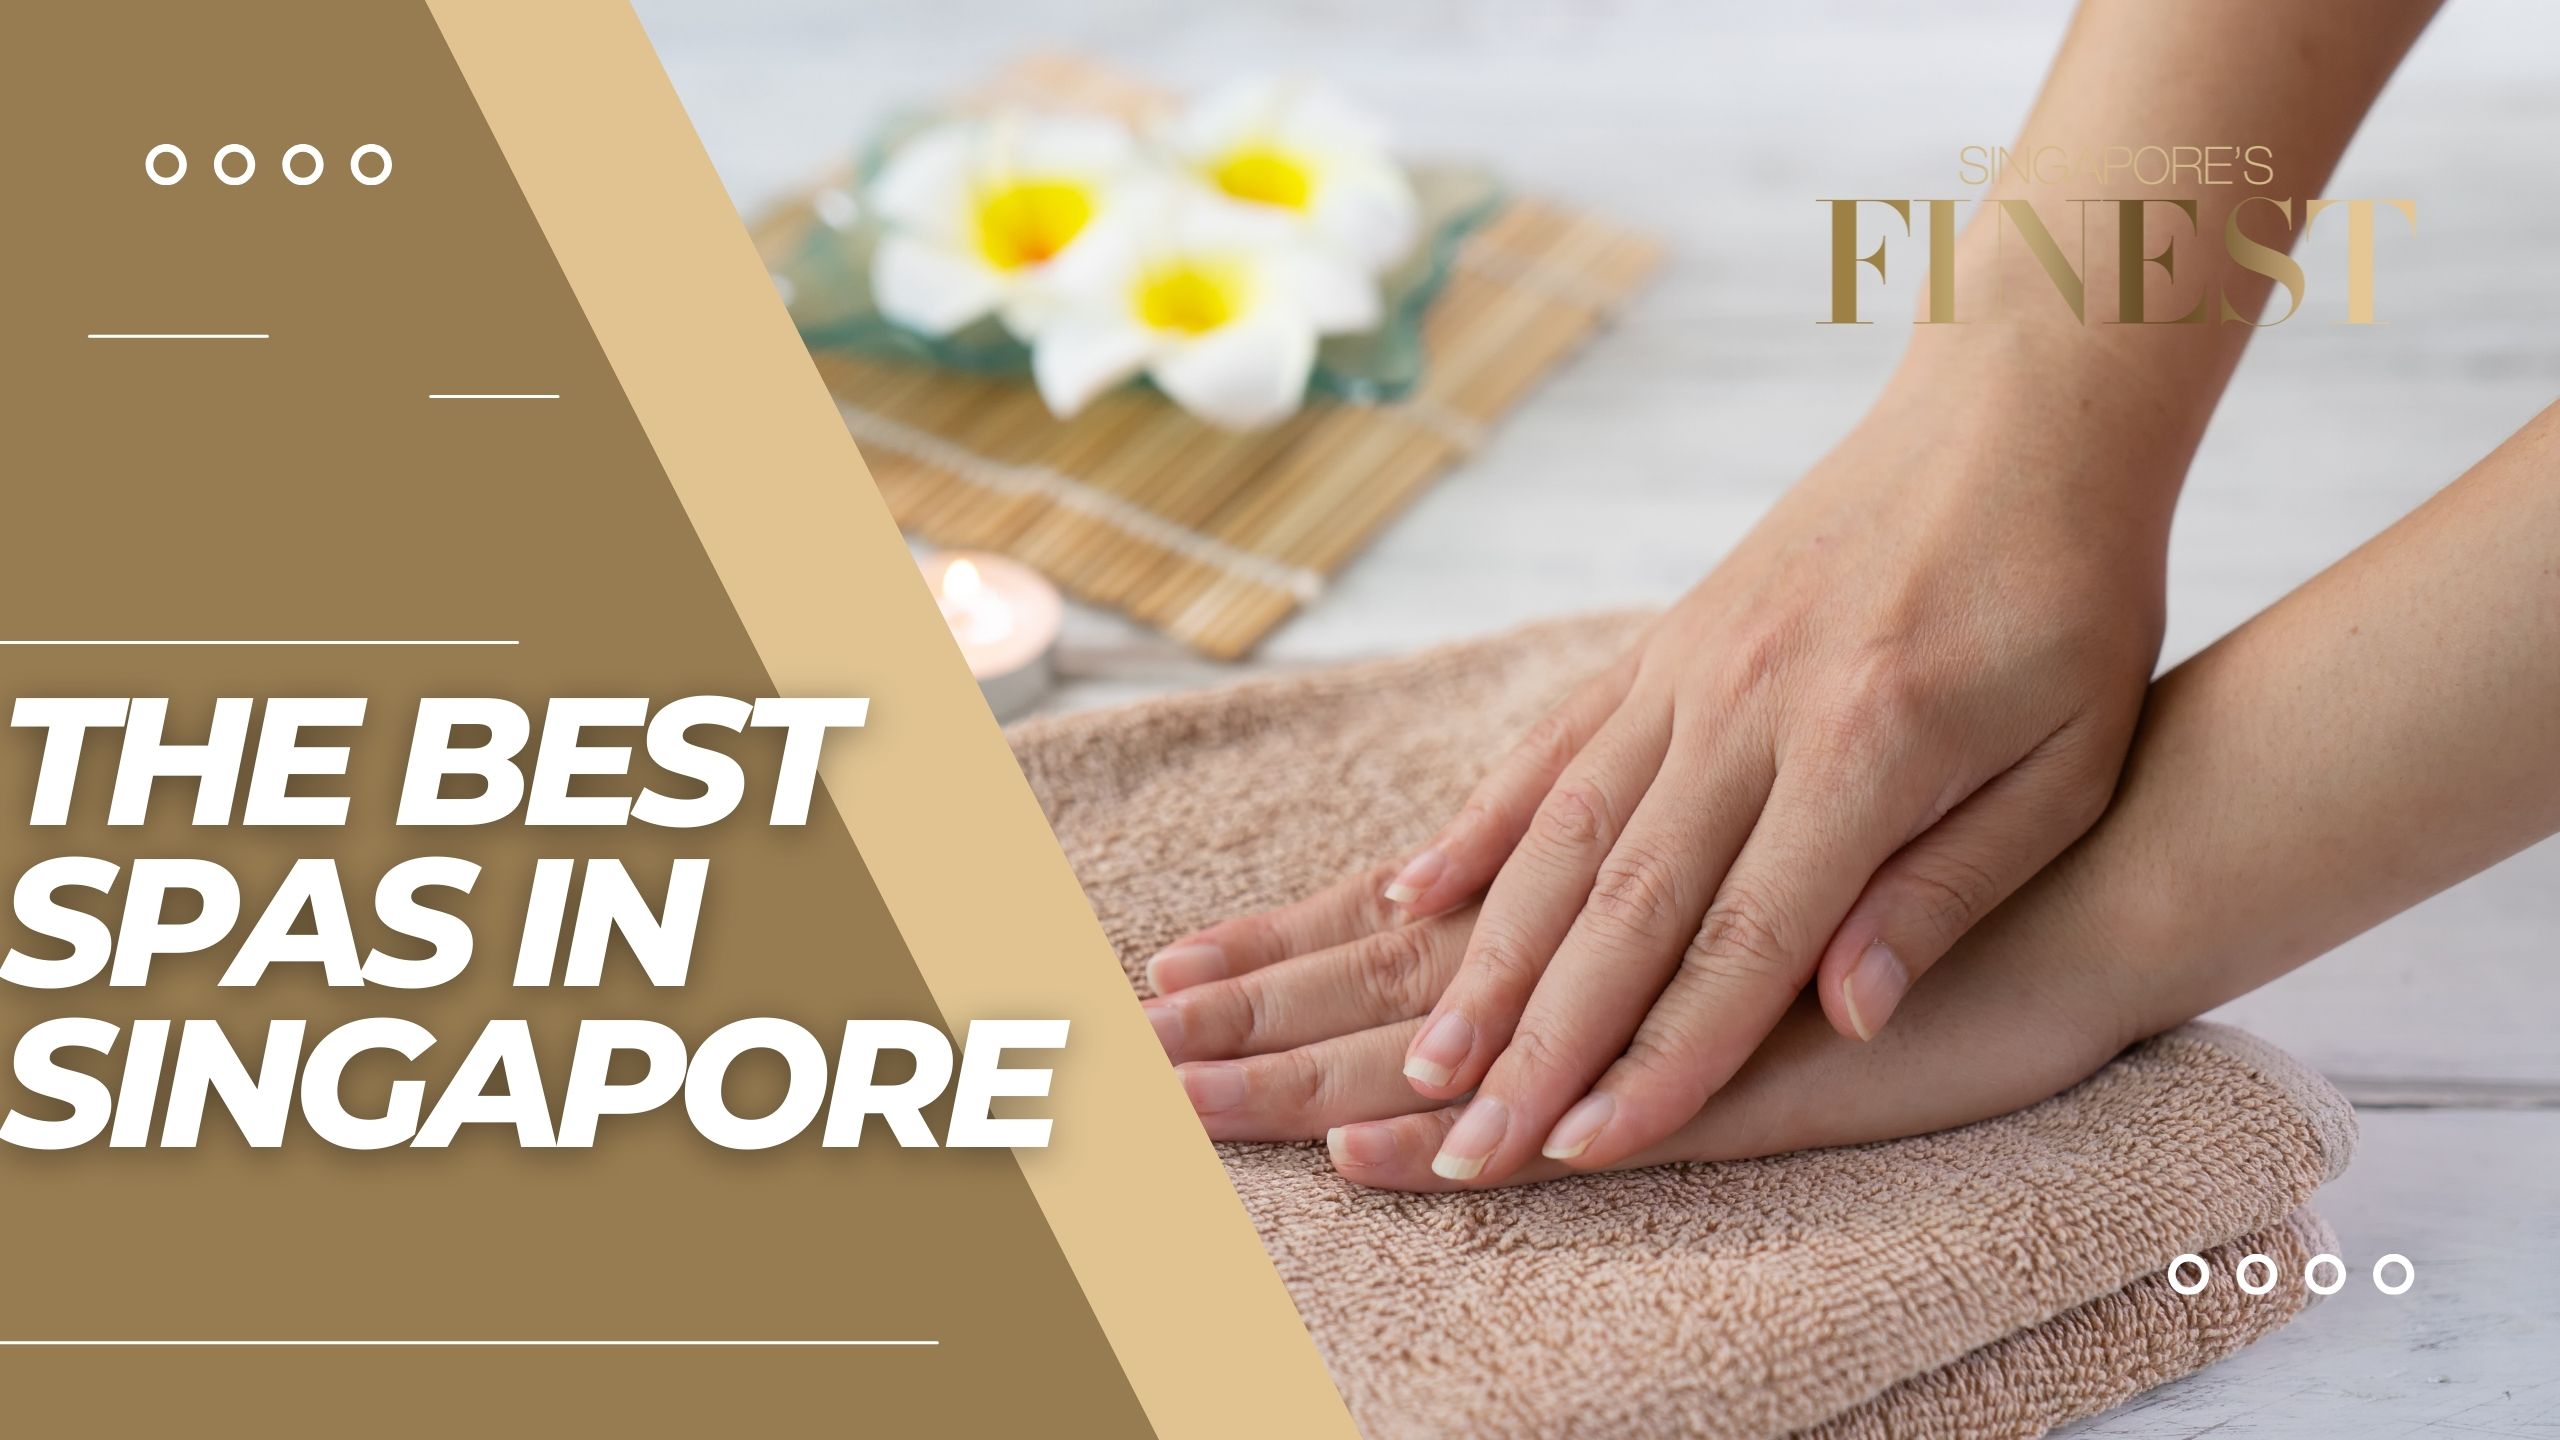 The Finest Spas in Singapore